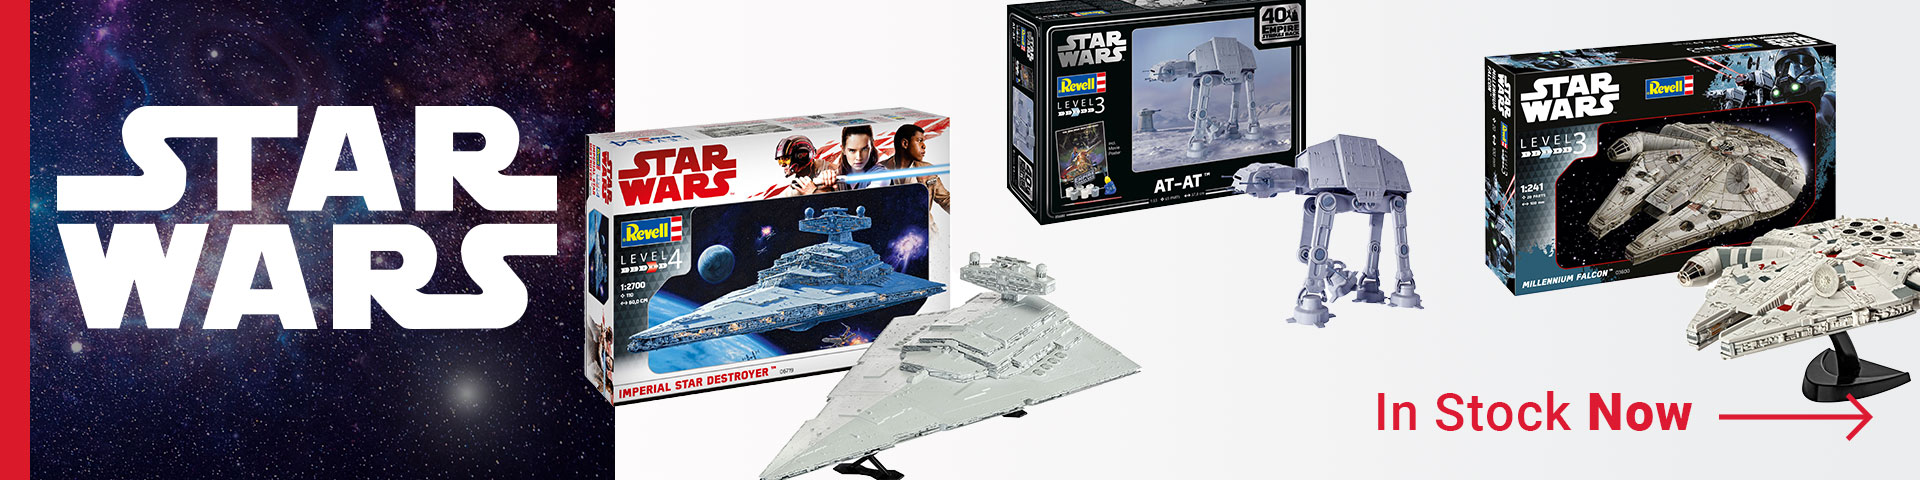 Purchase Star Wars models